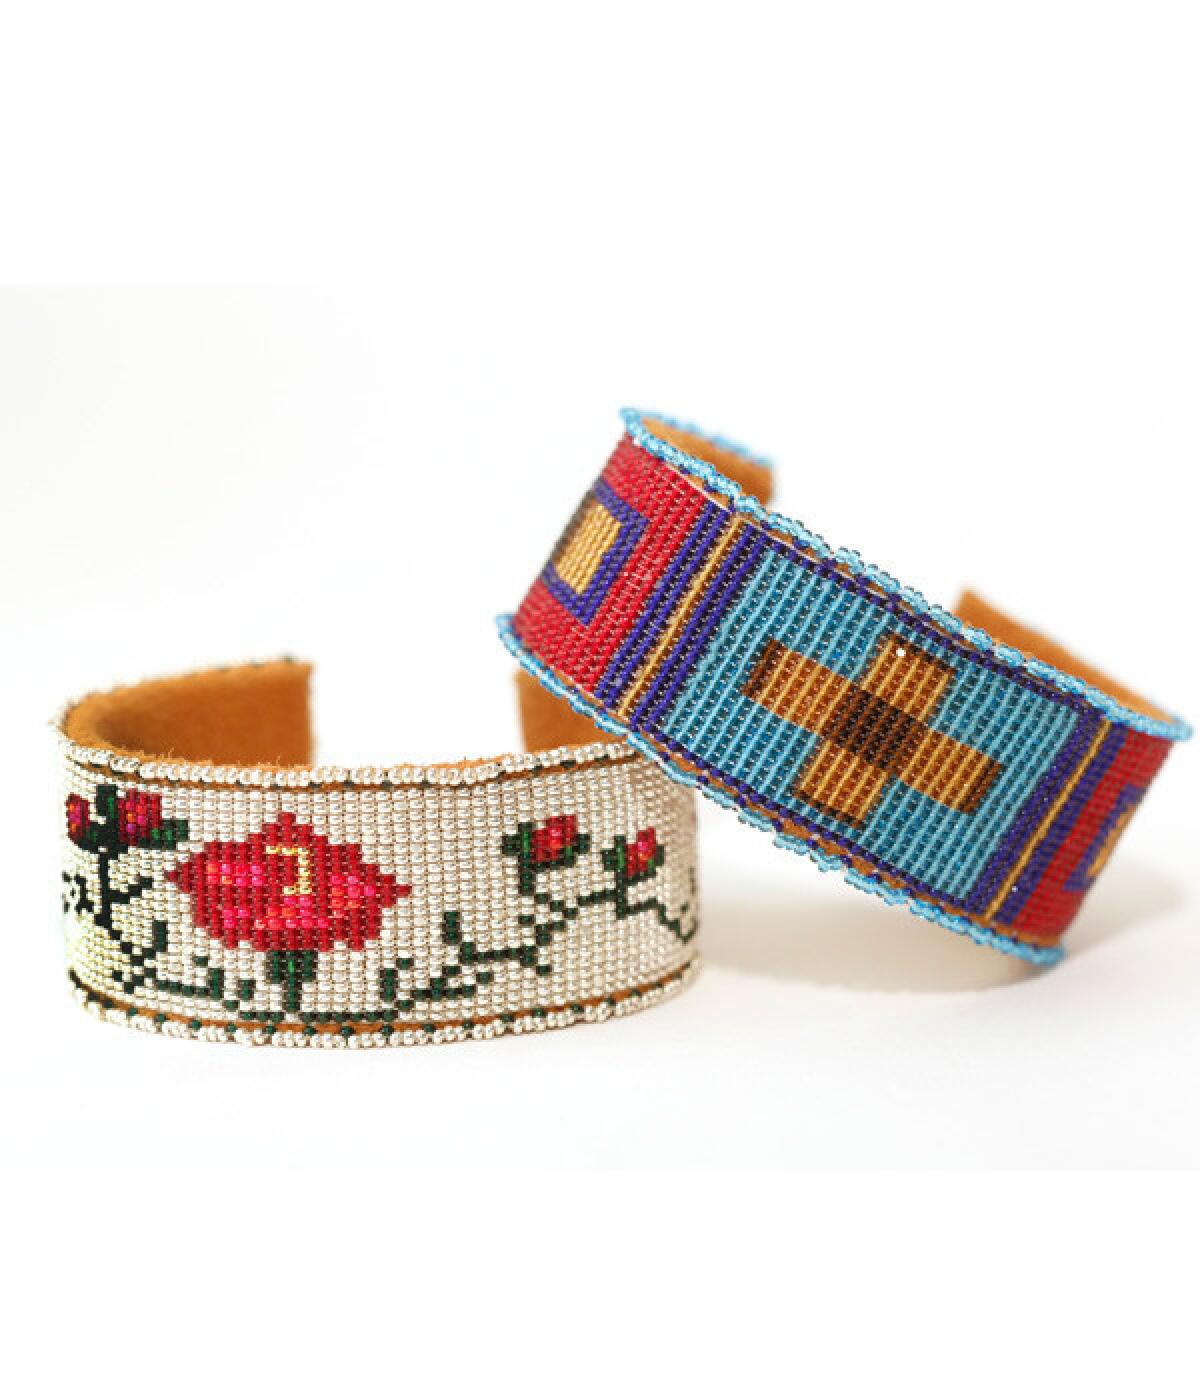 Teri Greeves hand-beaded leather cuff bracelets.